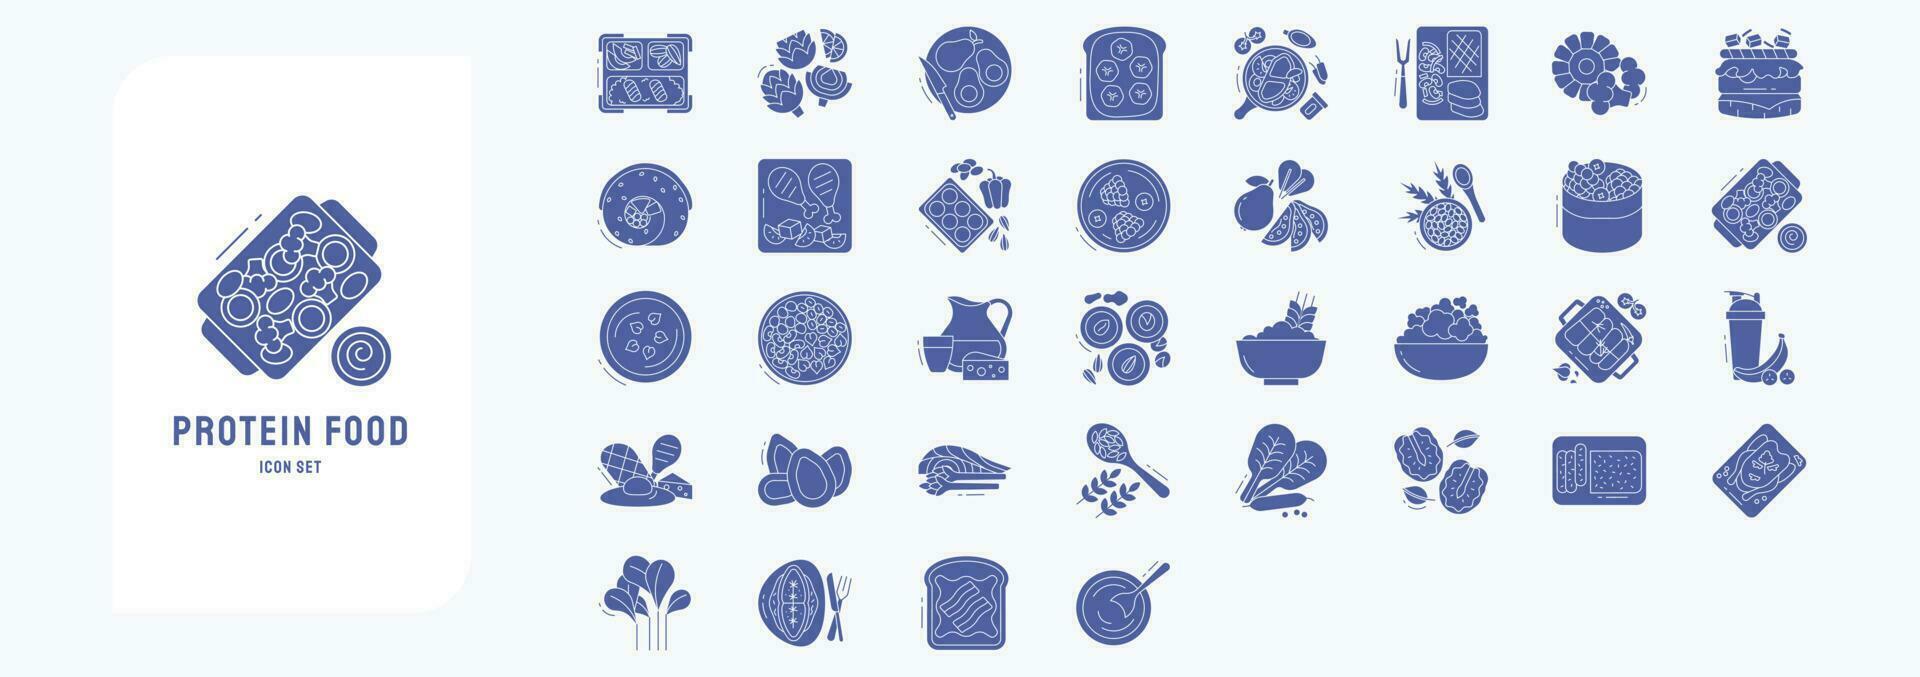 Collection of icons related to Protein Food , including icons like Avocado, toast, fruits and more vector